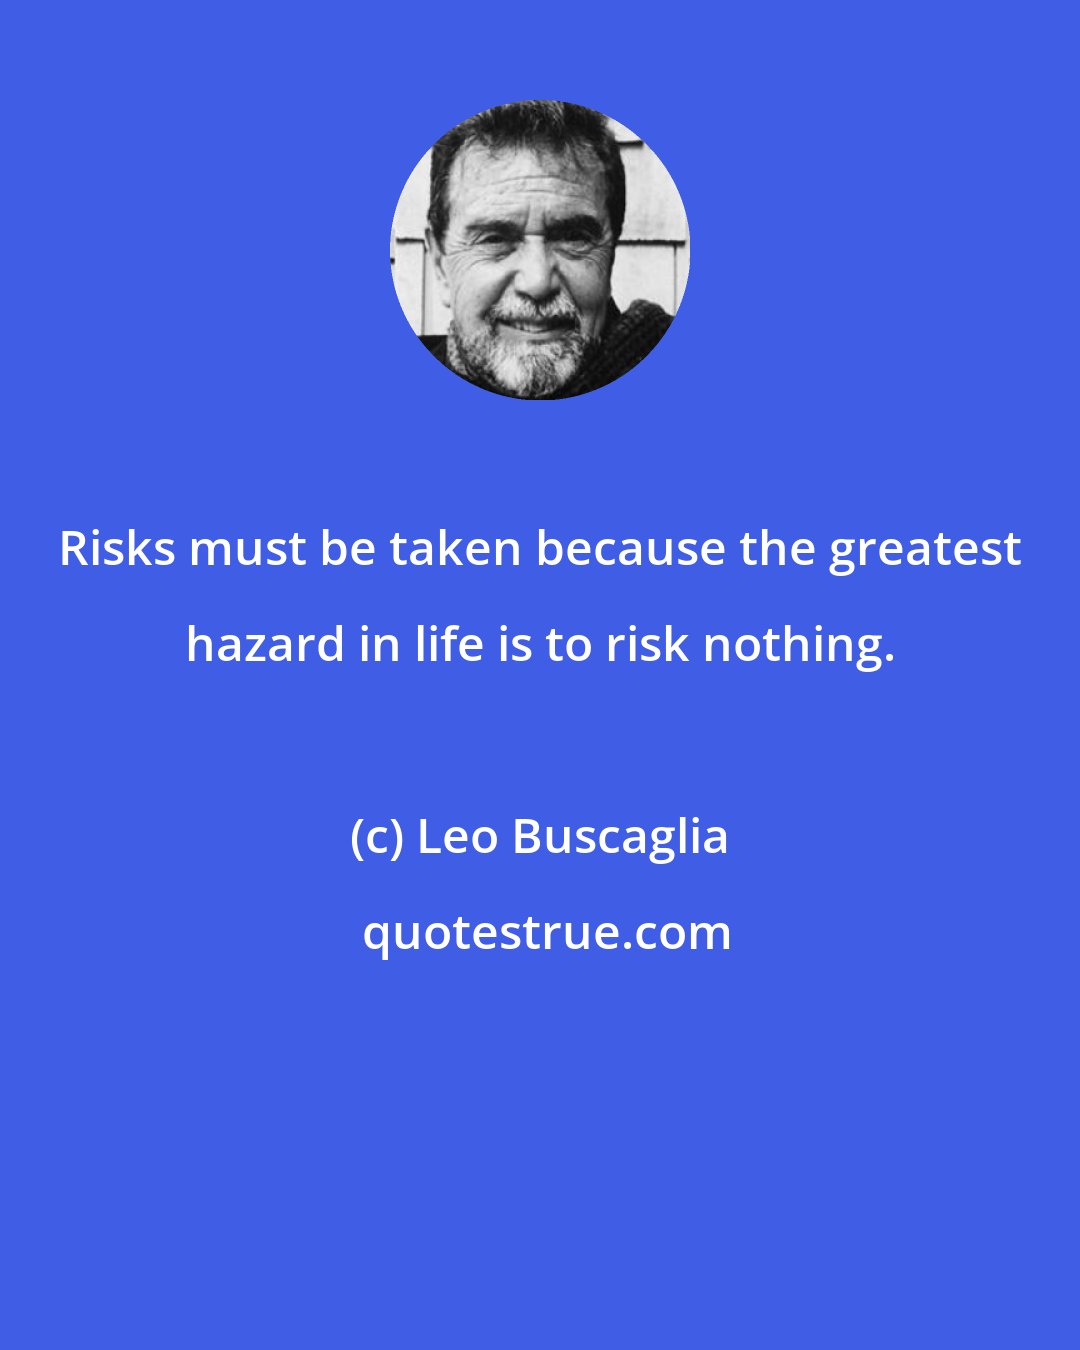 Leo Buscaglia: Risks must be taken because the greatest hazard in life is to risk nothing.